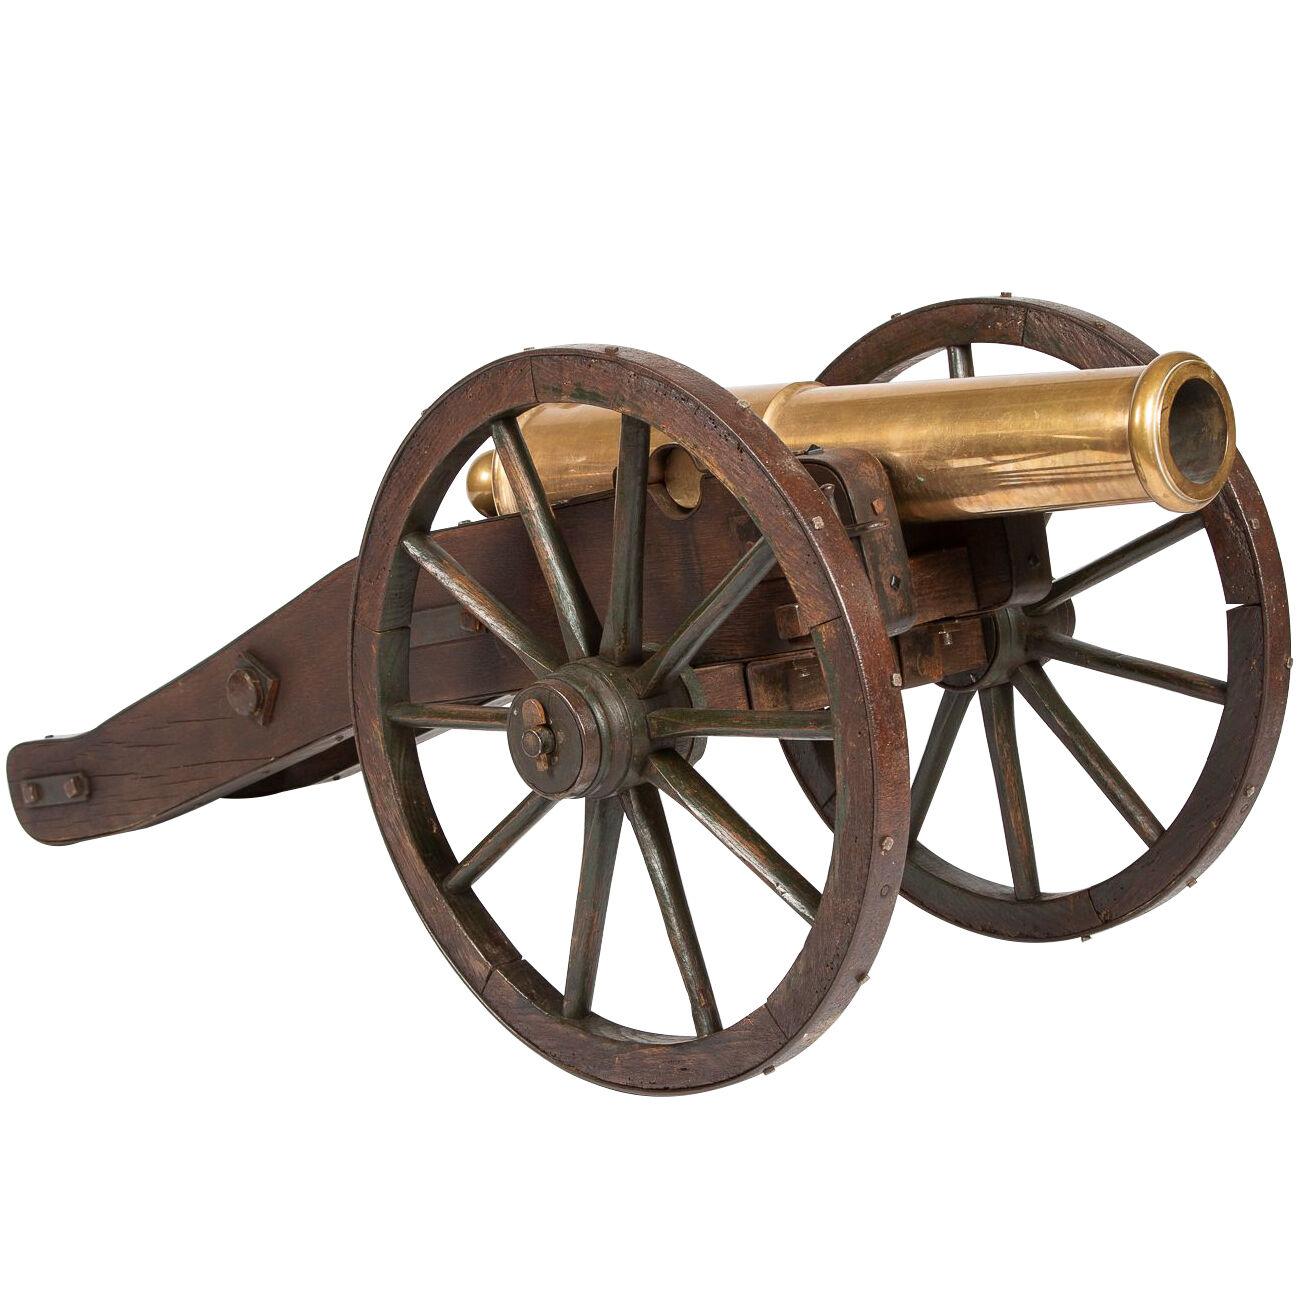 French muzzle loaded mountain cannon